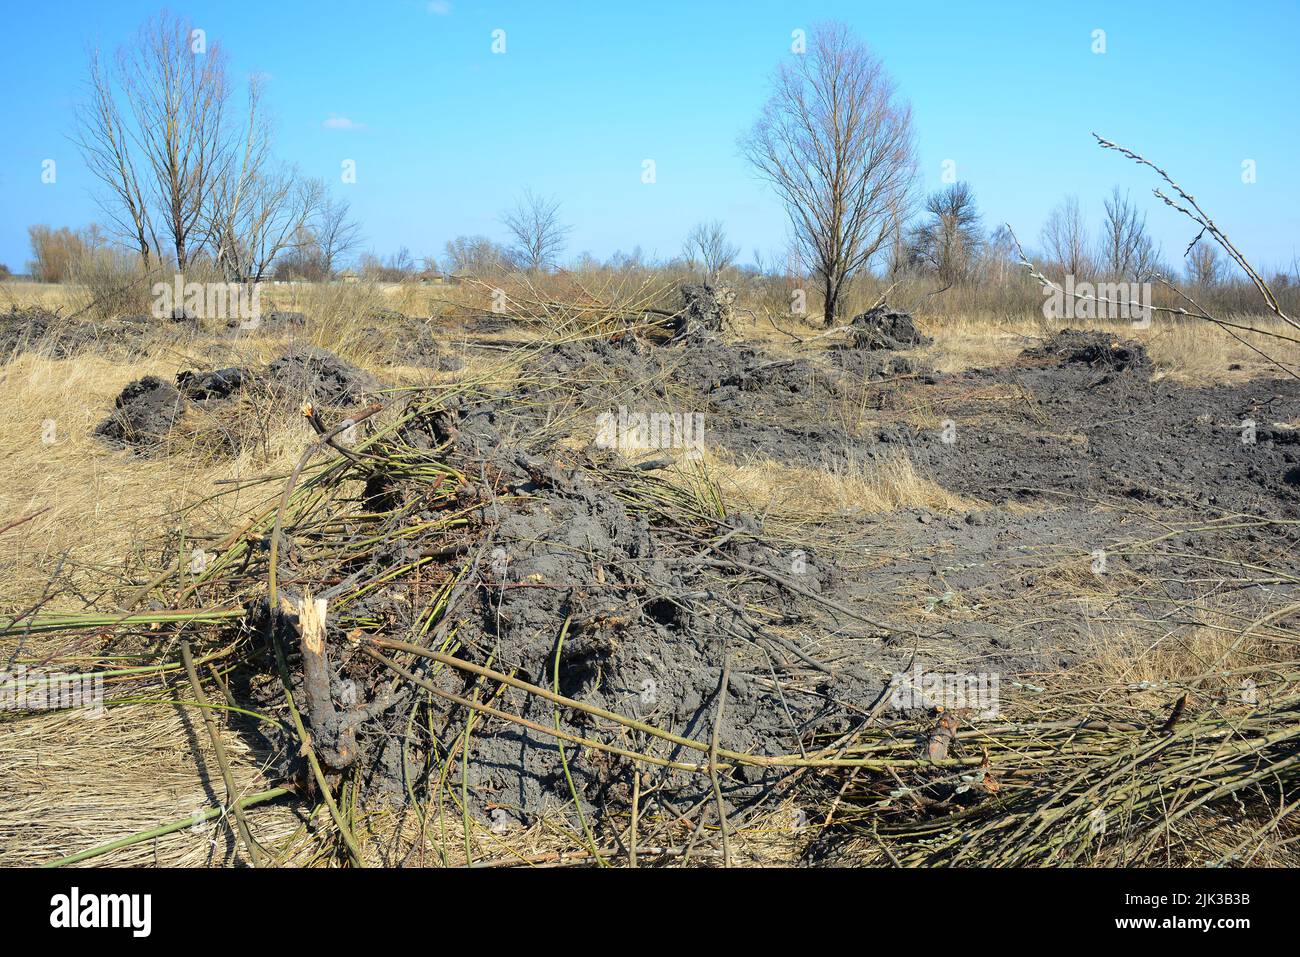 Drought and farming. Grubbed out, cut and cleared trees, shrubs and stumps with a bulldozer, crawler on a dry swamp to increase cultivated field area. Stock Photo